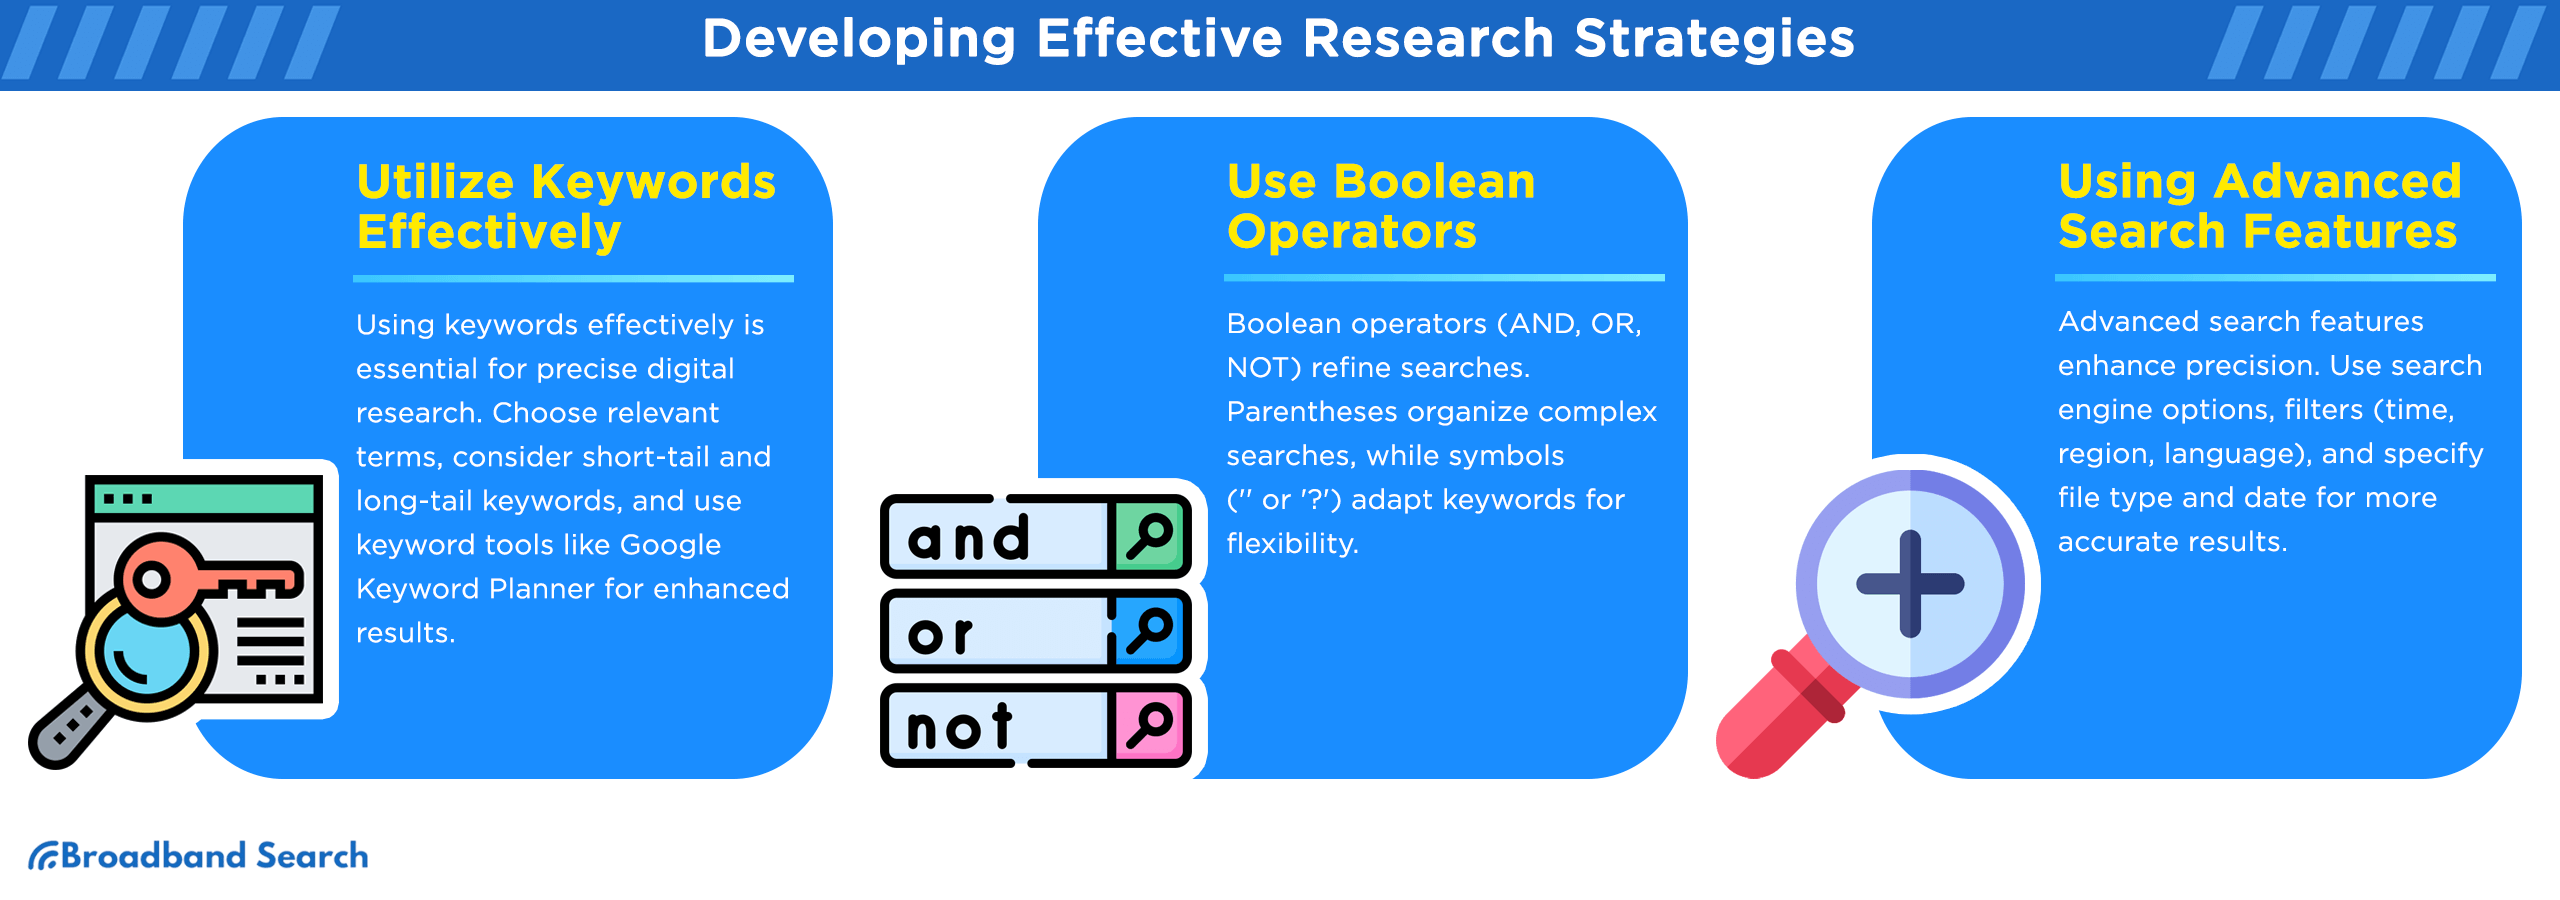 Tips on how to develop effective research strategies